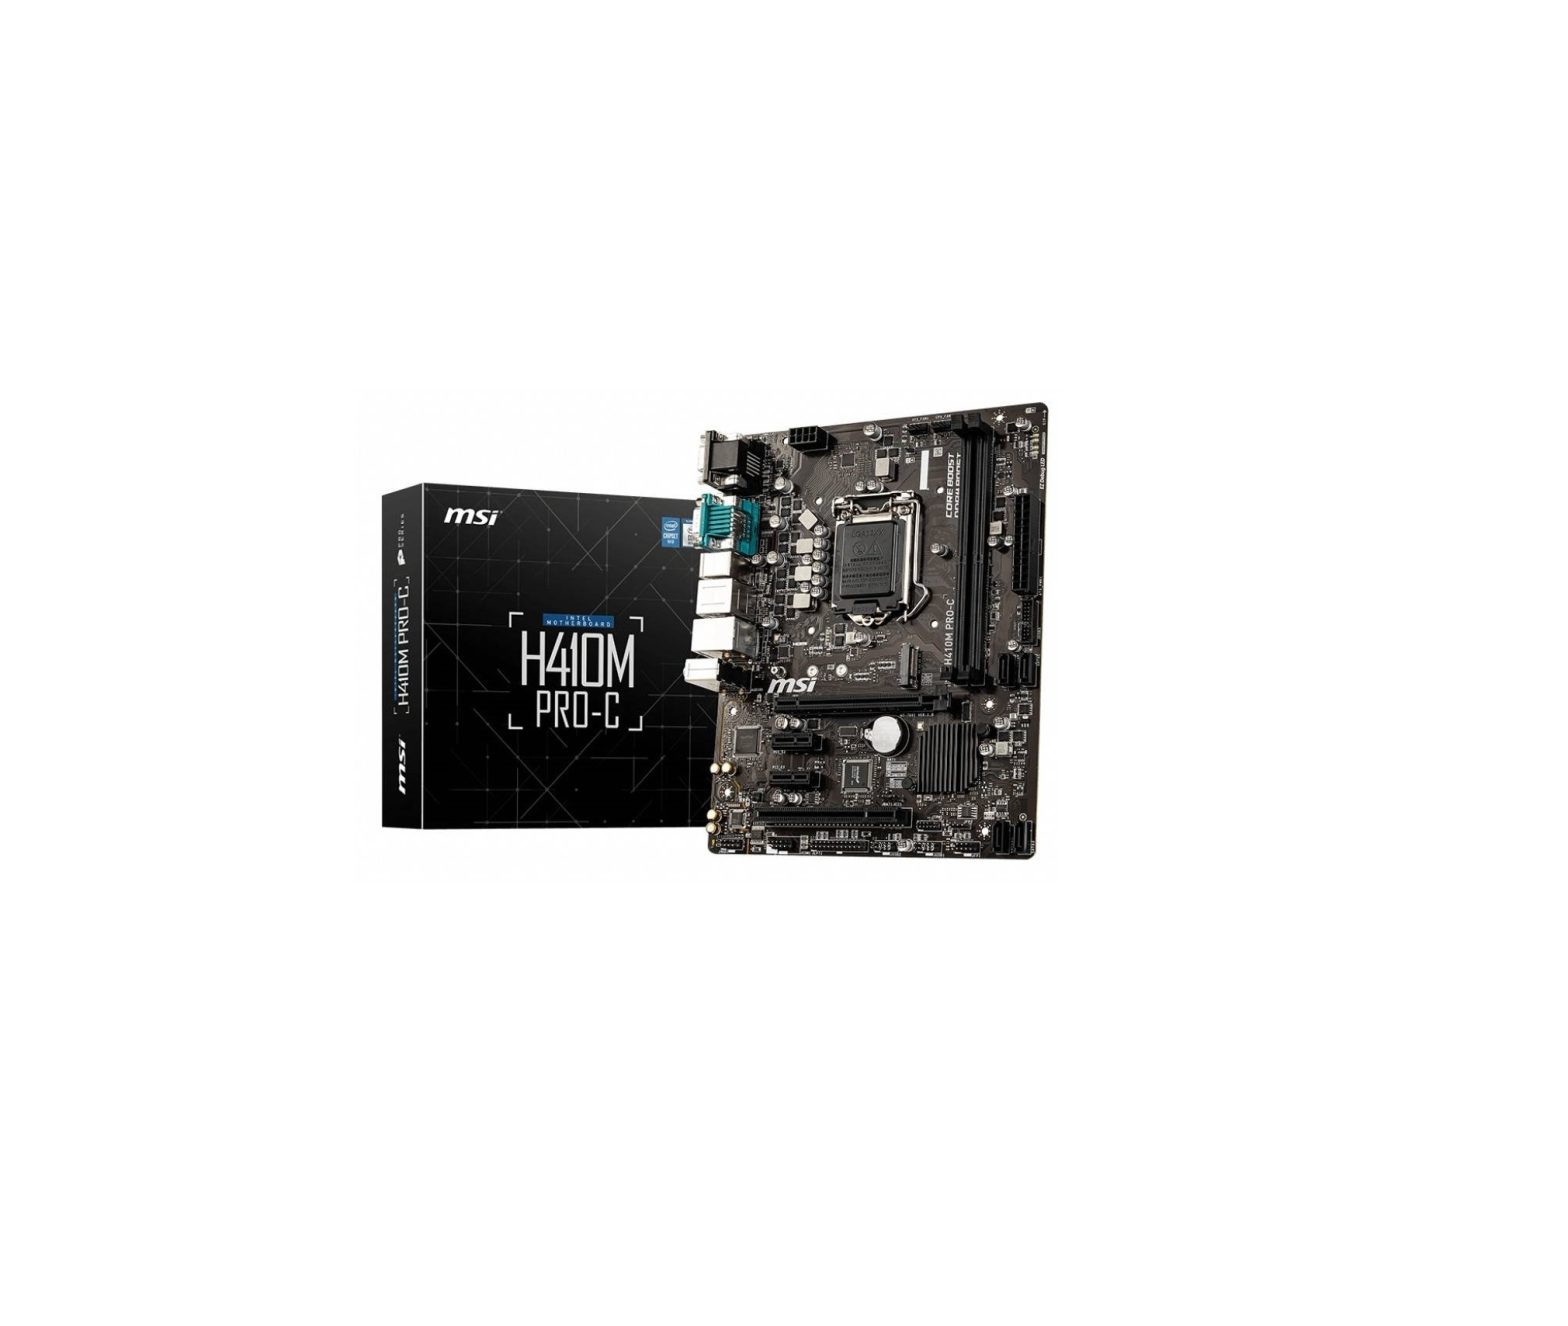 msi H410M Pro Motherboard User Guide